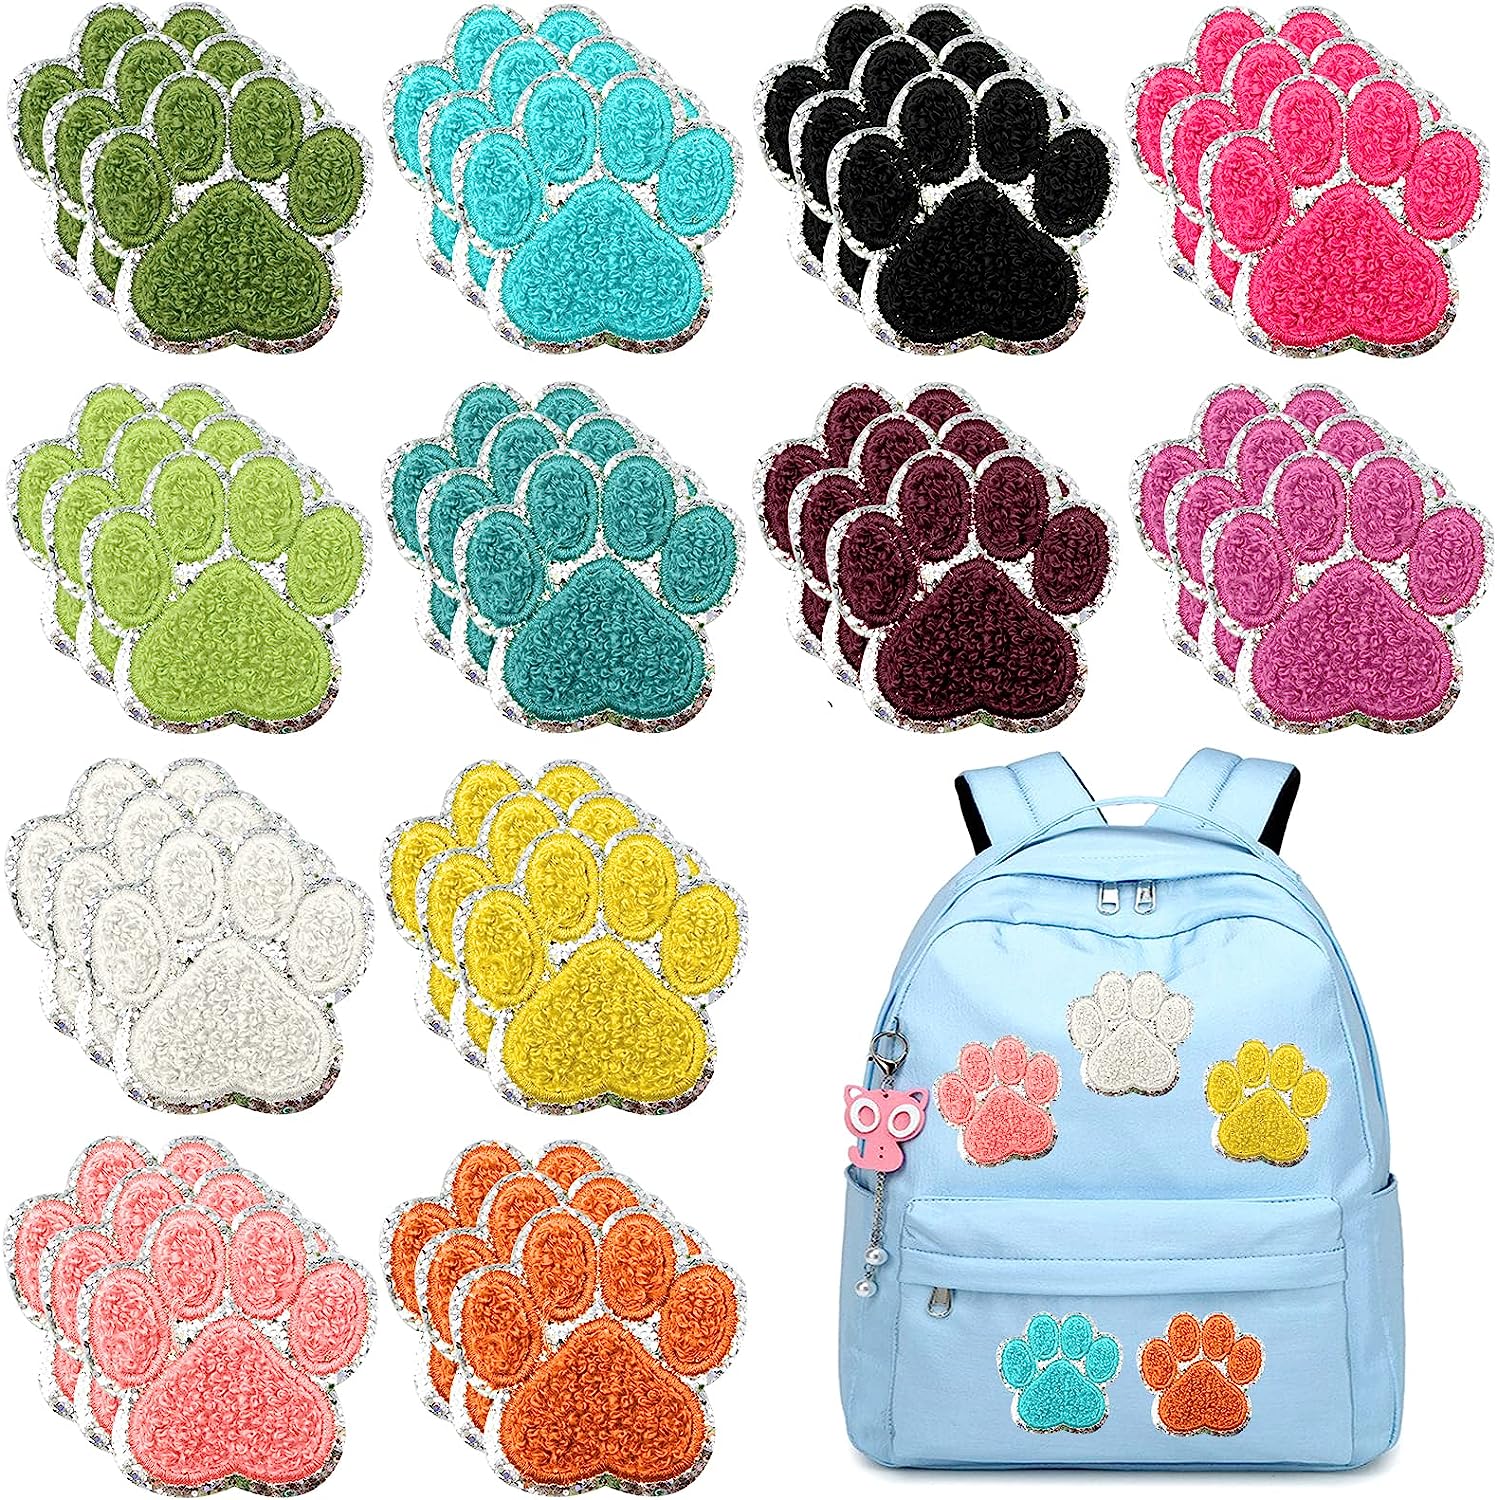 36 PCS Self Adhesive Paw Print Patches, ZYNERY Paw [...]